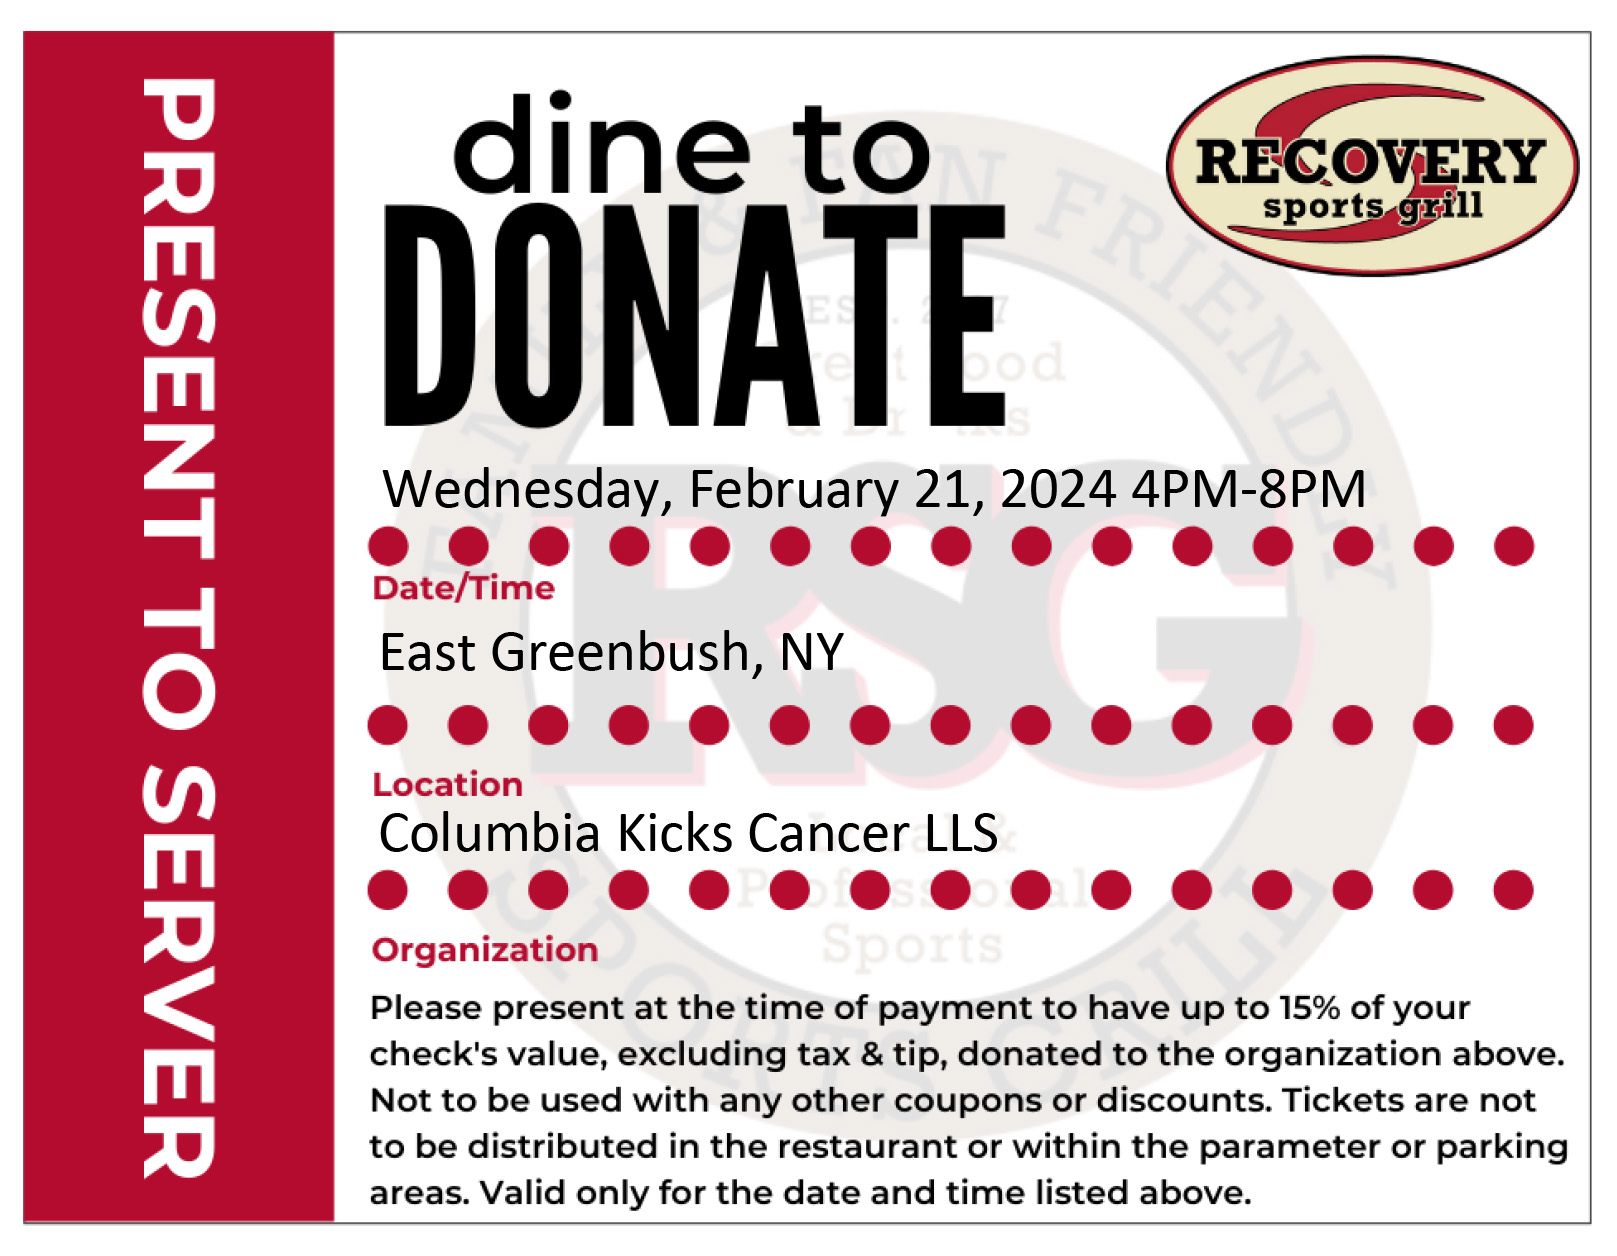 Columbia Kicks Cancer Recovery Sports Grill flyer